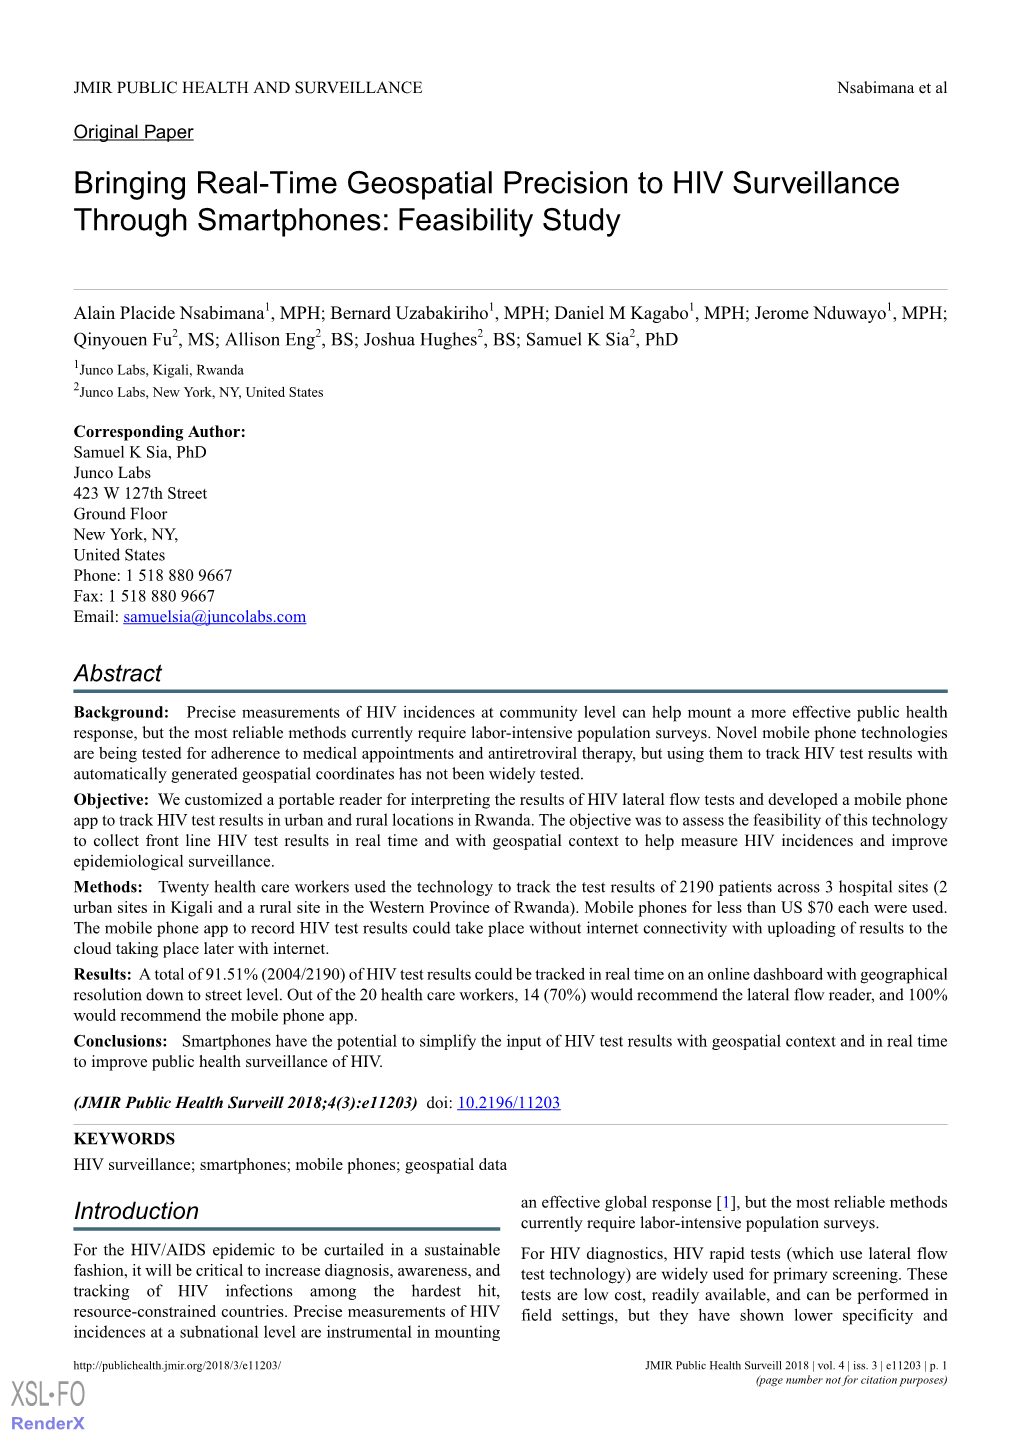 Bringing Real-Time Geospatial Precision to HIV Surveillance Through Smartphones: Feasibility Study